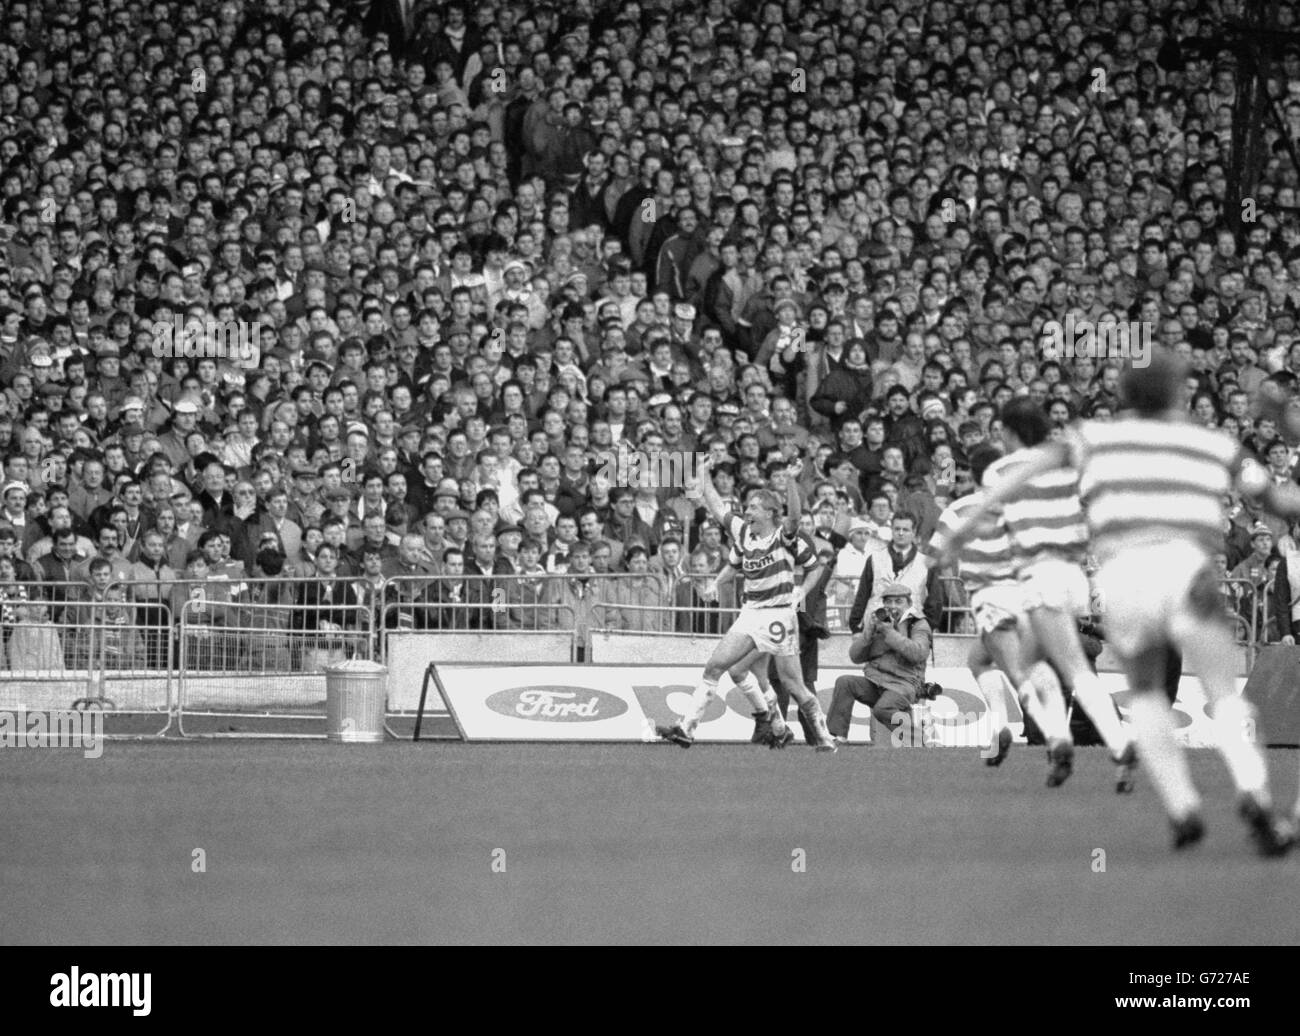 Frank McAvennie jubliant after scoring the first of his two goals for Celtic against Rangers during the Old Firm match at Parkhead. Celtic won 2-0 and have a seven point lead over Rangers at the top of the Scottish League Premier Division. Stock Photo